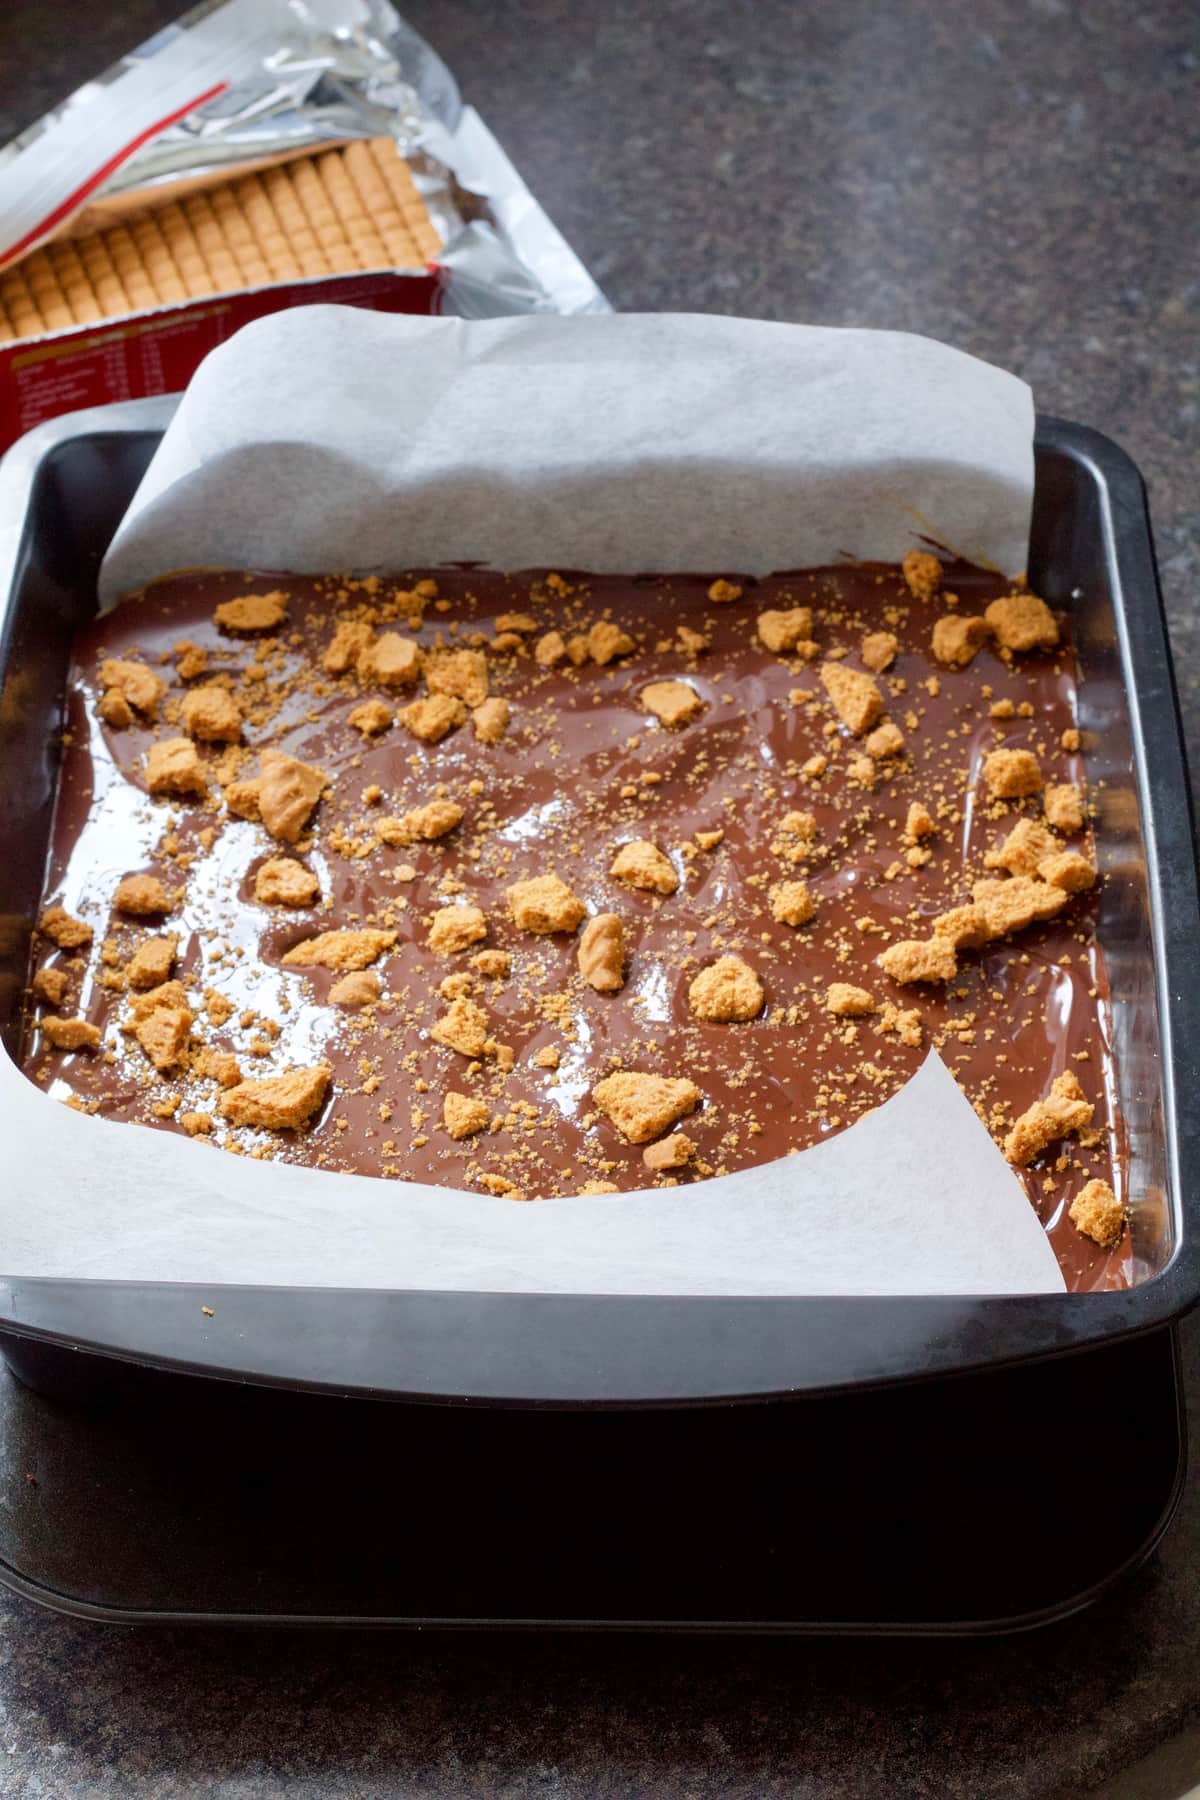 Tin with millionaire's shortbread showing top layer of chocolate and crushed biscuits.